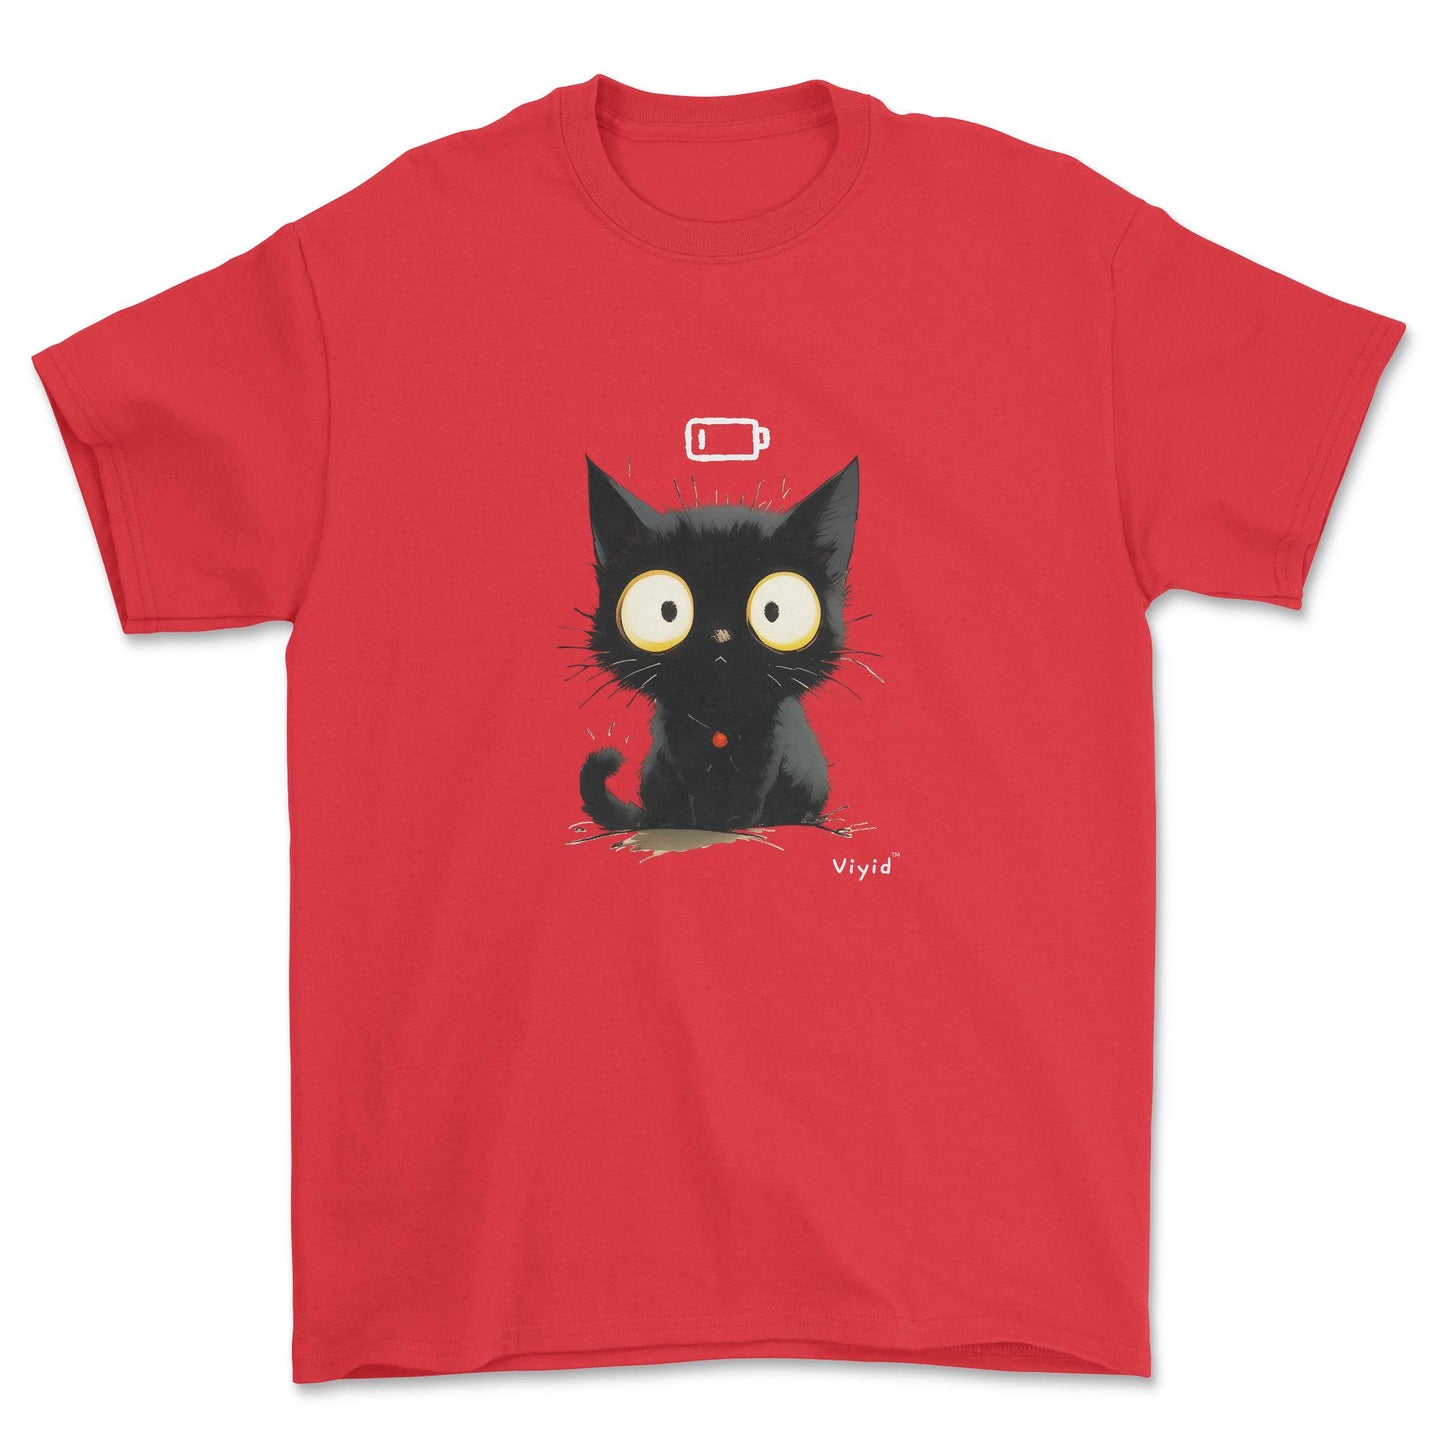 Low battery black cat adult t-shirt red